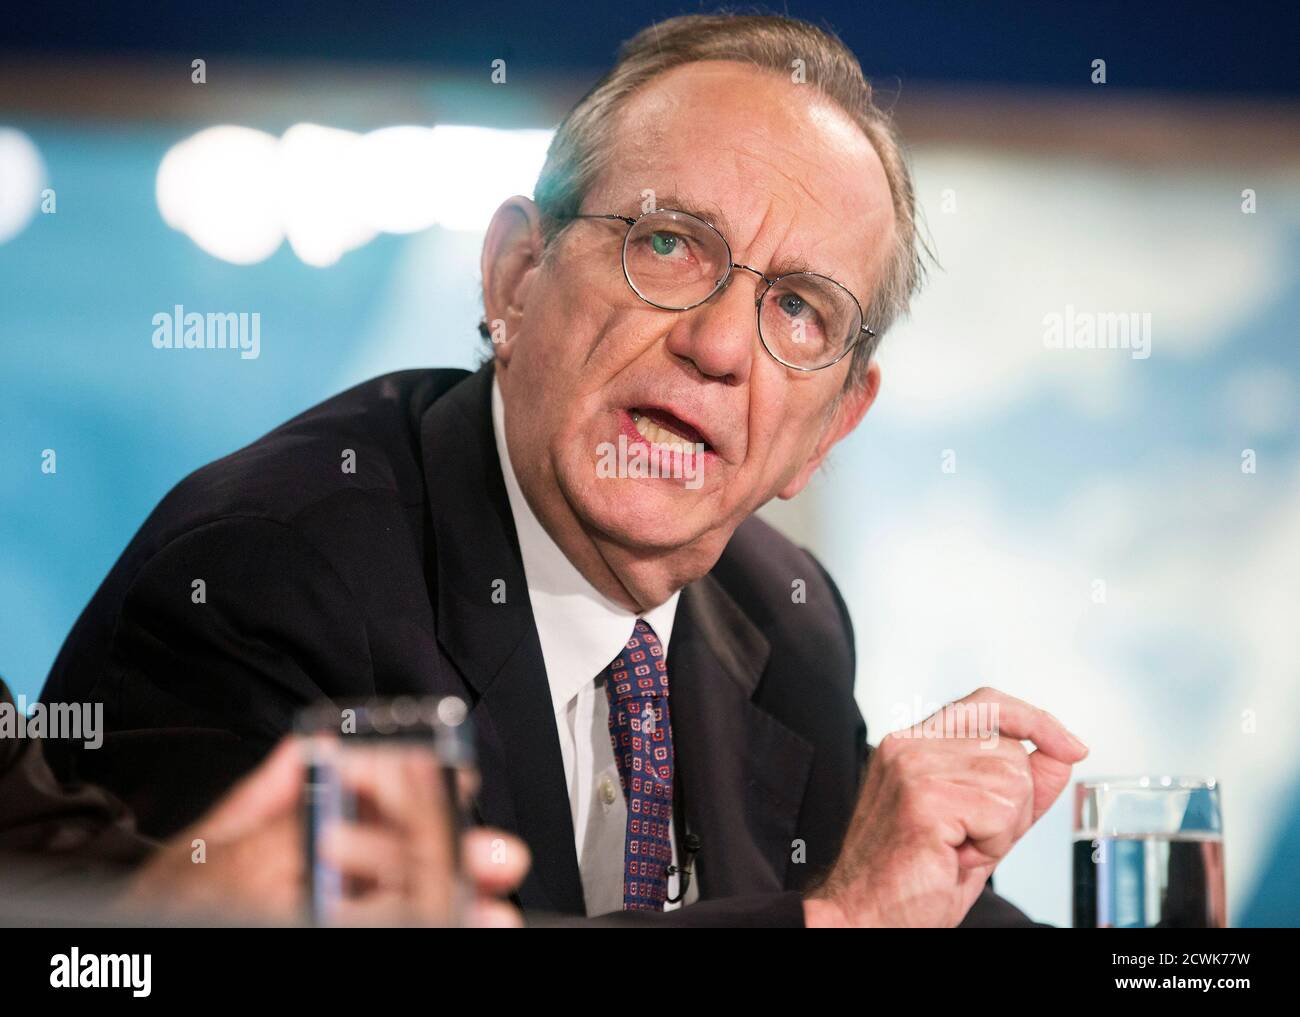 Italy's Minister of Economy and Finance Pier Carlo Padoan speaks during a discussion on 'A Reform Agenda for Europe's Leaders' during the World Bank/IMF annual meetings in Washington October 9, 2014.      REUTERS/Joshua Roberts    (UNITED STATES - Tags: POLITICS BUSINESS) Stock Photo